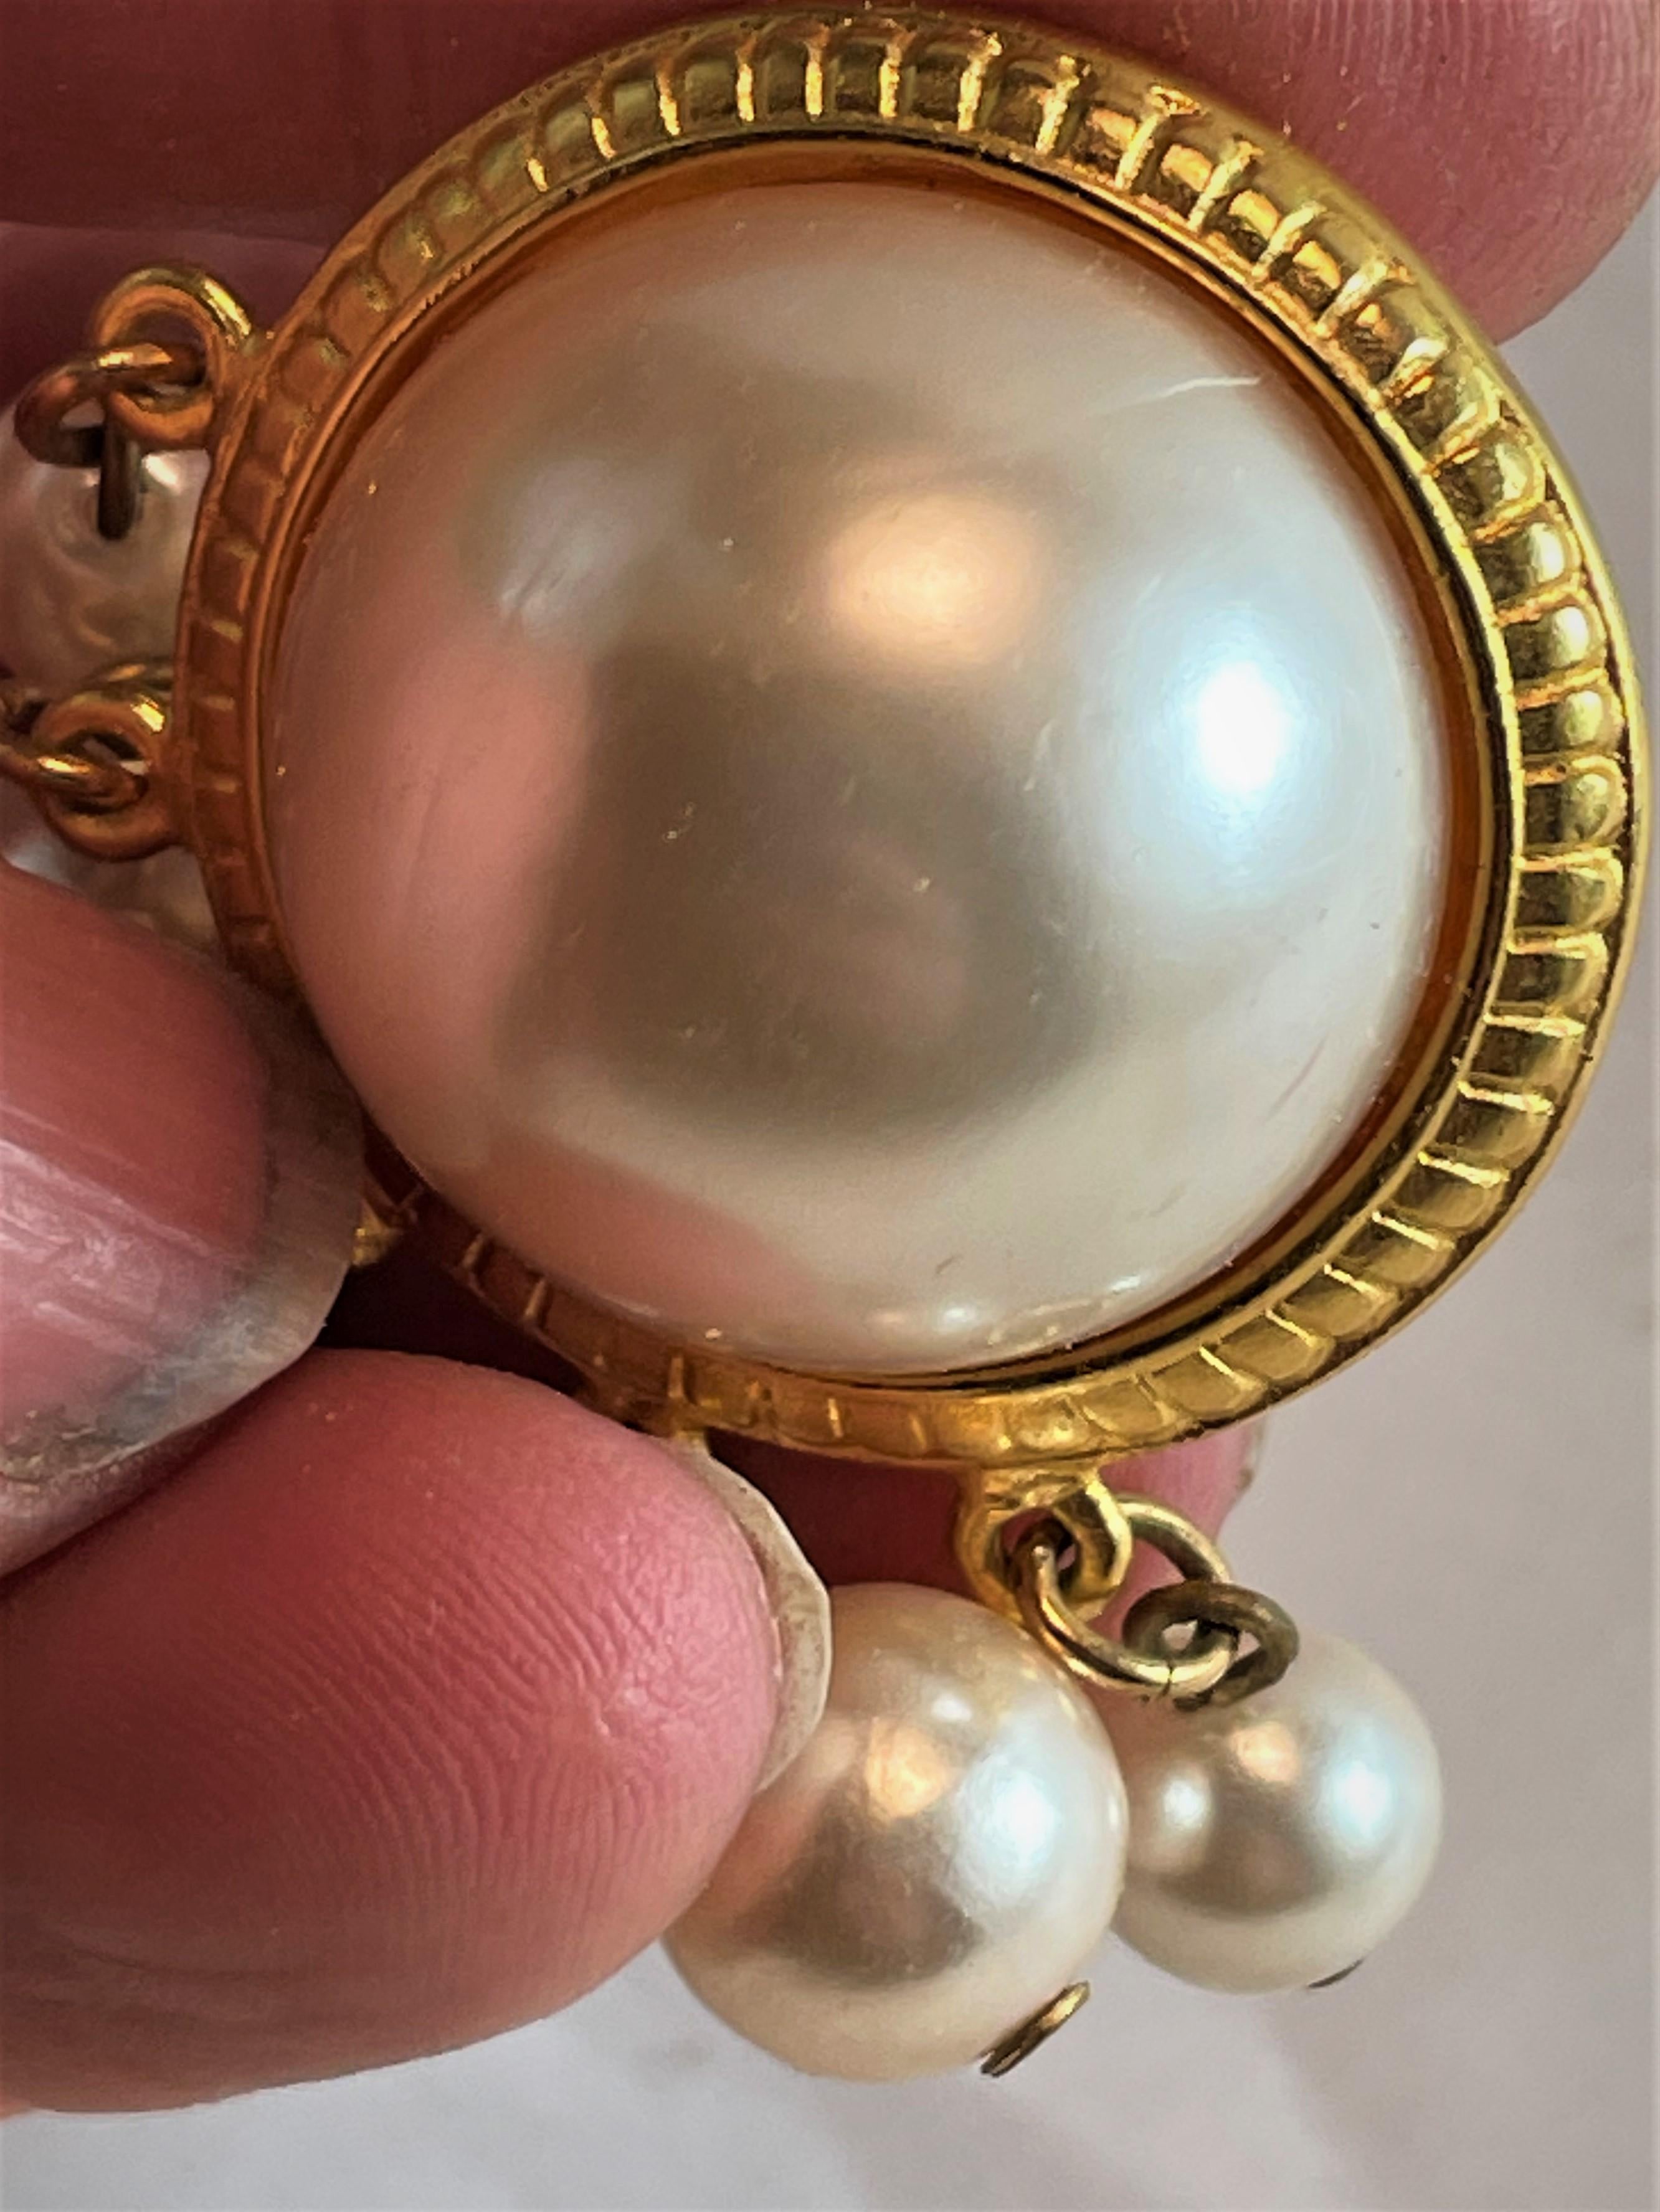  Ben-Amun Faux Mabe Pearl Clip Earrings w/ Dangles In Good Condition For Sale In Clifton Forge, VA